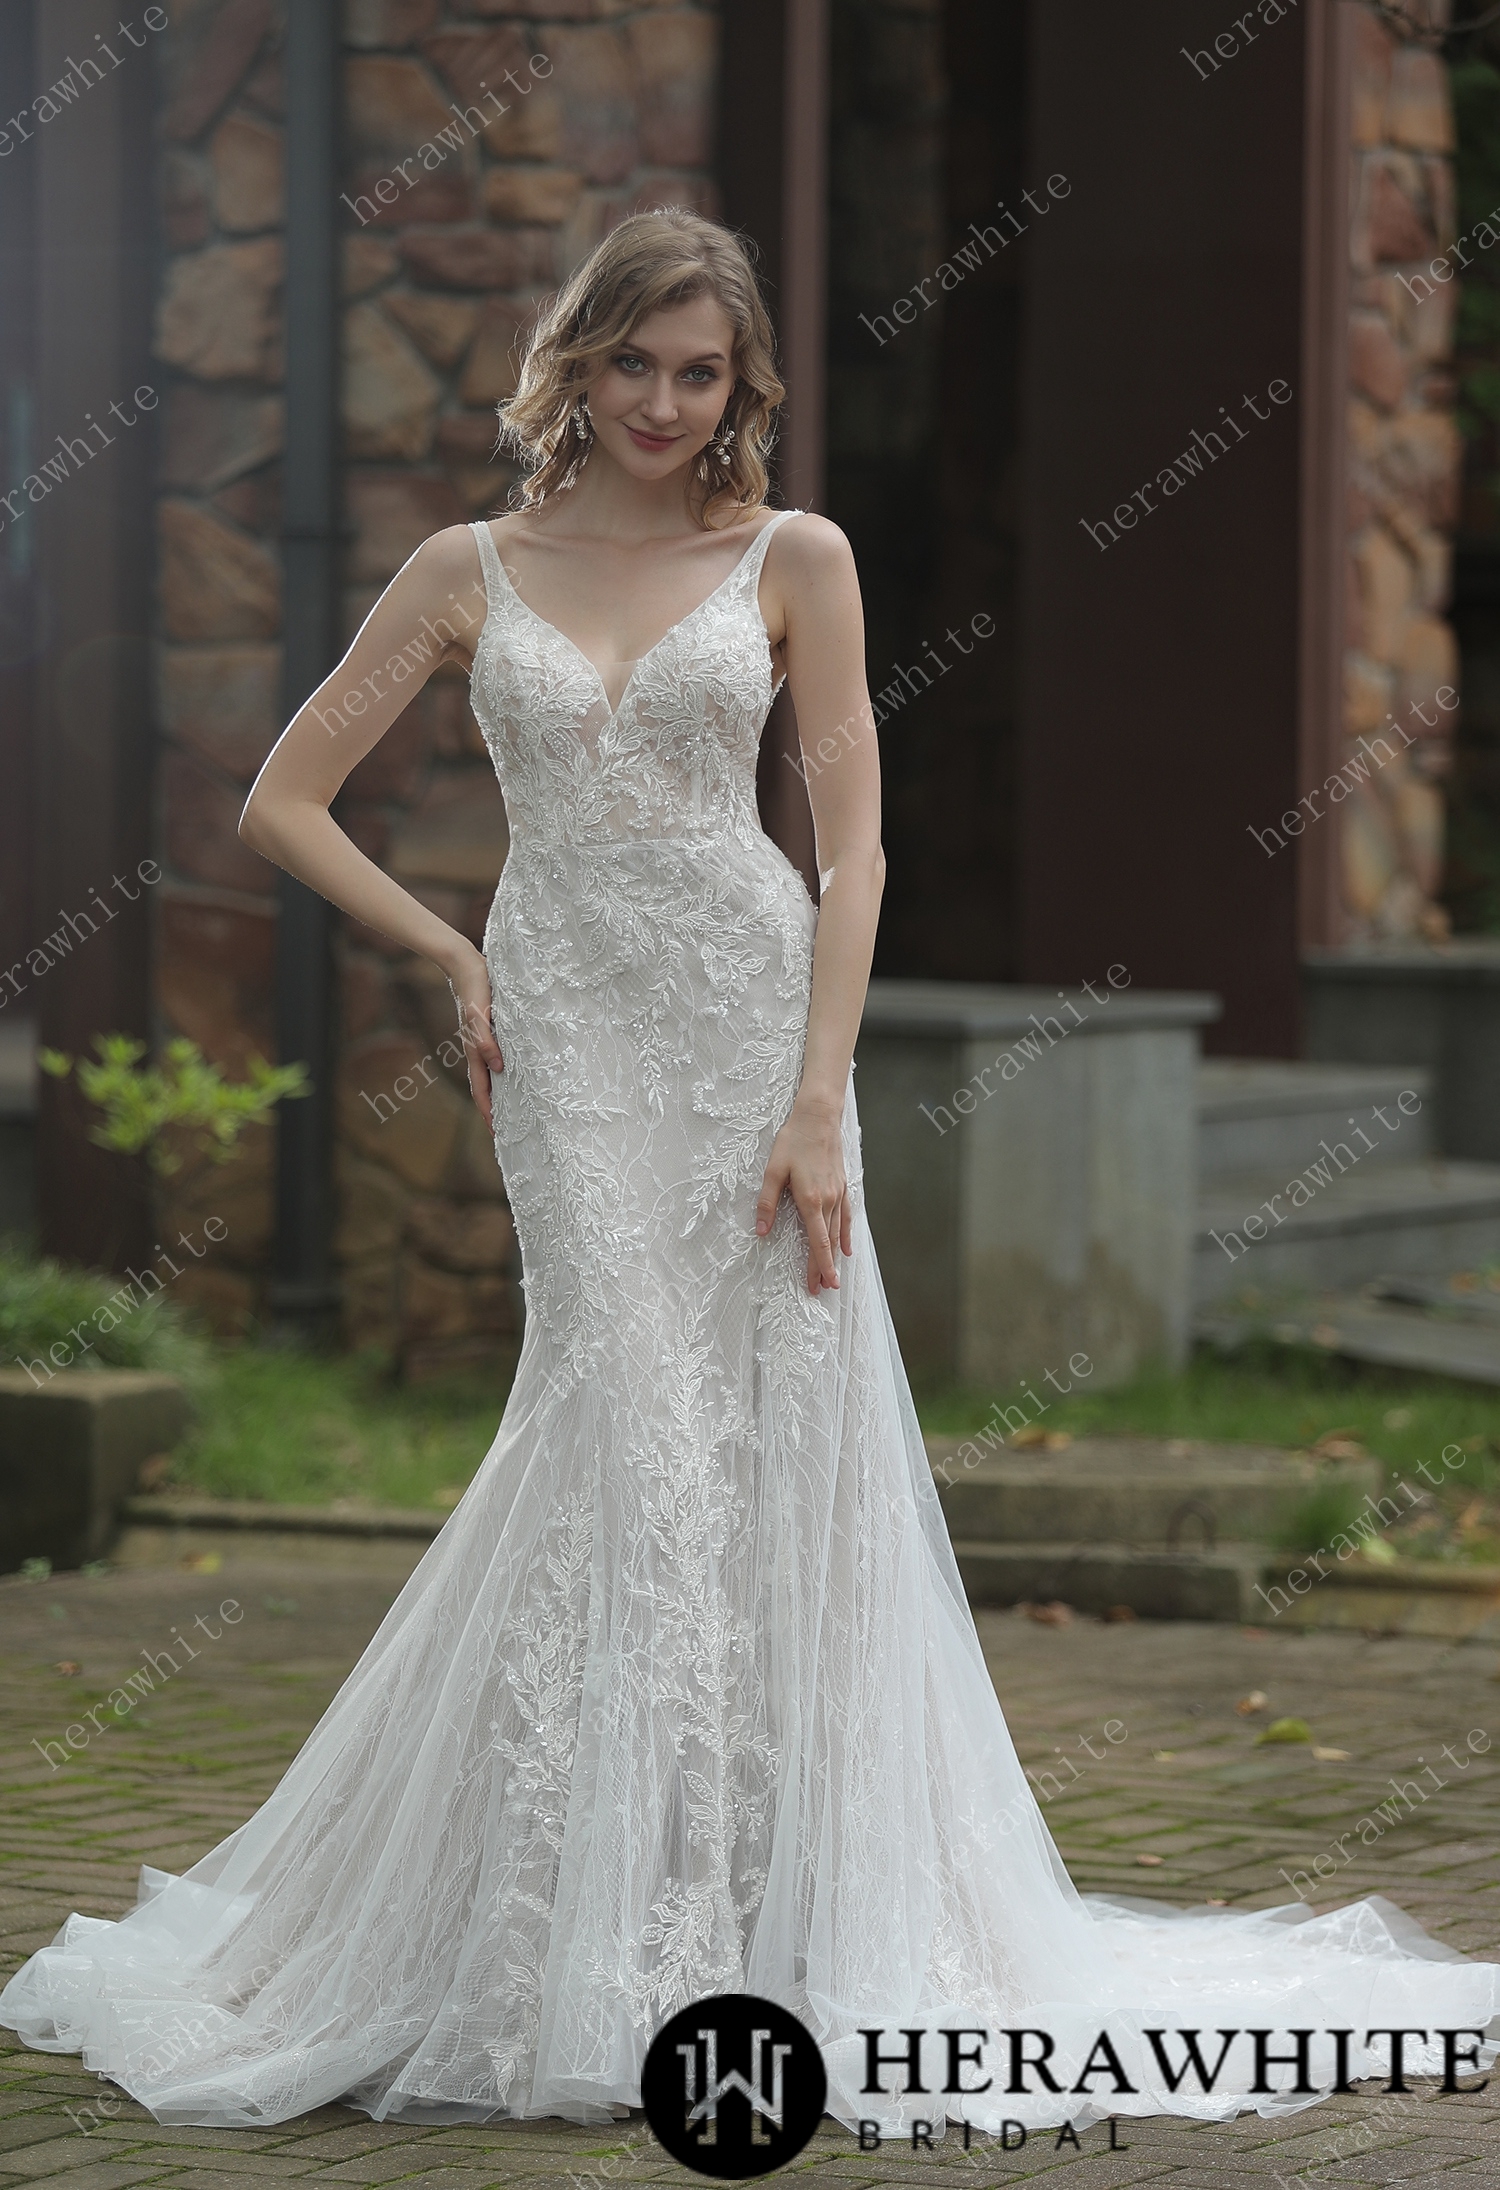 Square Neckline Wedding Dress with Delicate Leafy Lace – TulleLux